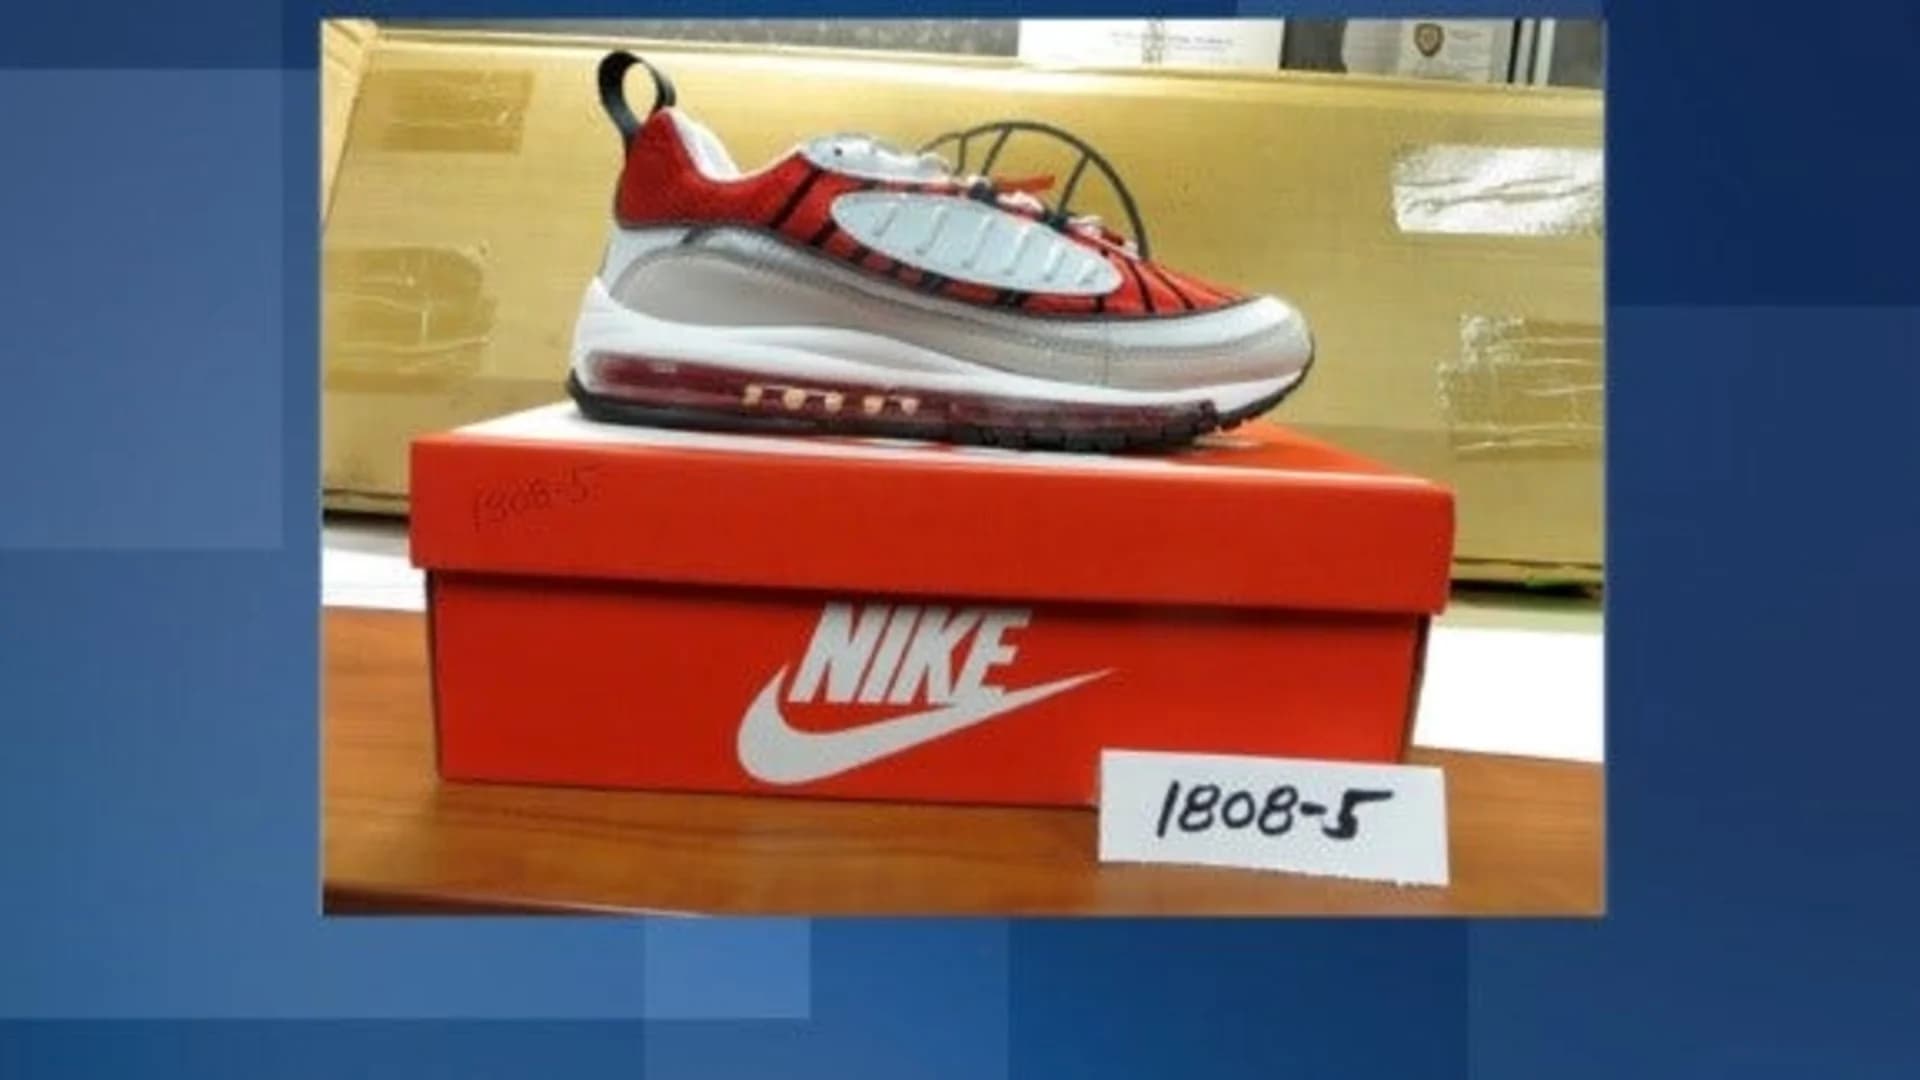 Nearly $2M worth of fake Nike sneakers seized at Port of New York/Newark